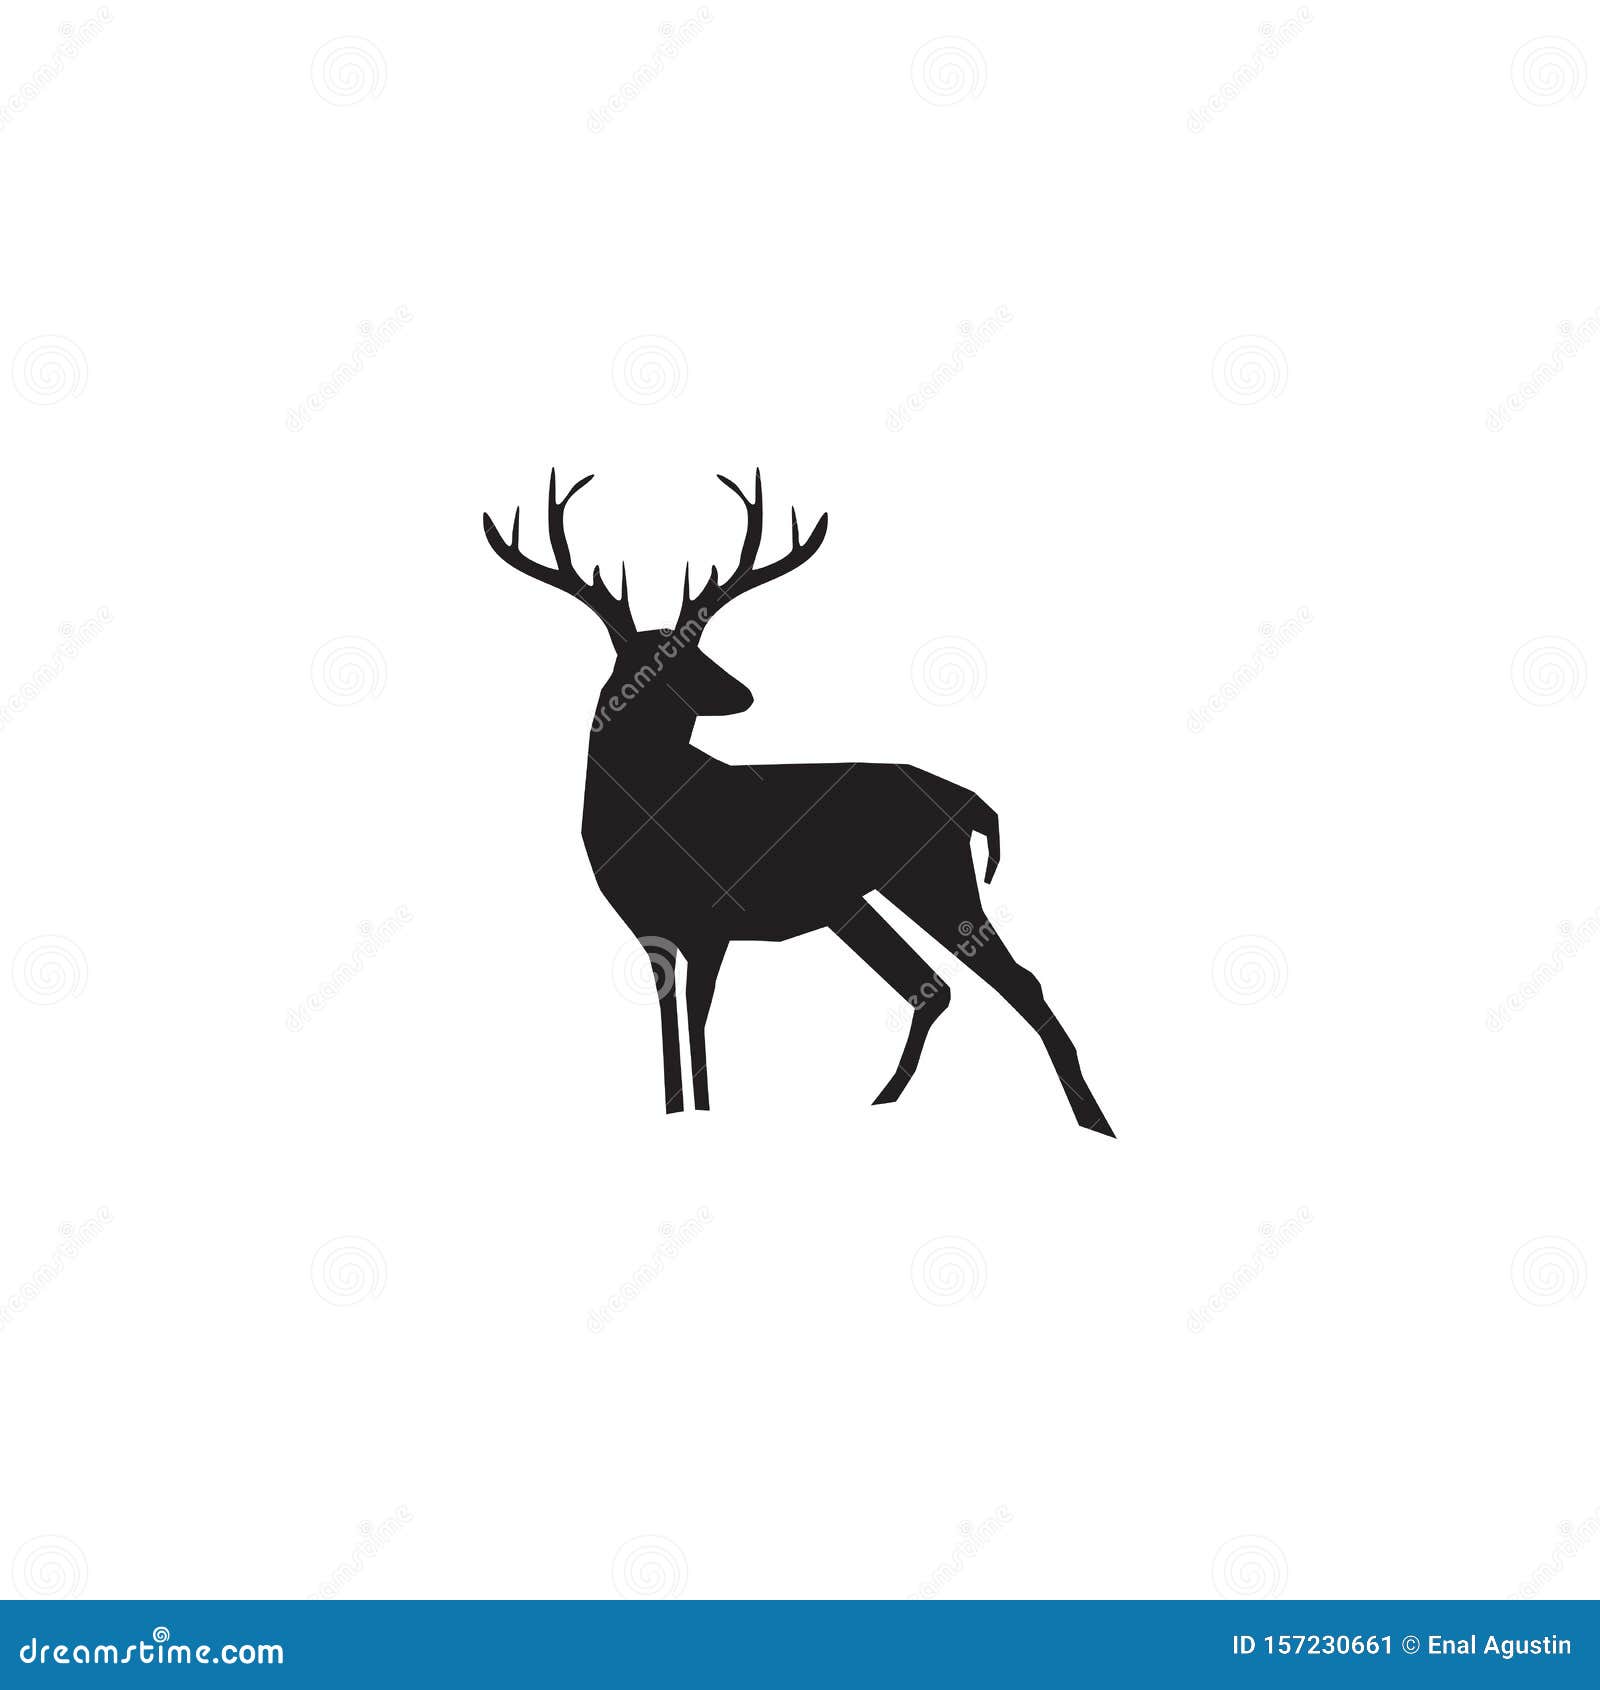 Deer PNG Image And Clipart Image For Free Download - Lovepik | 401519818